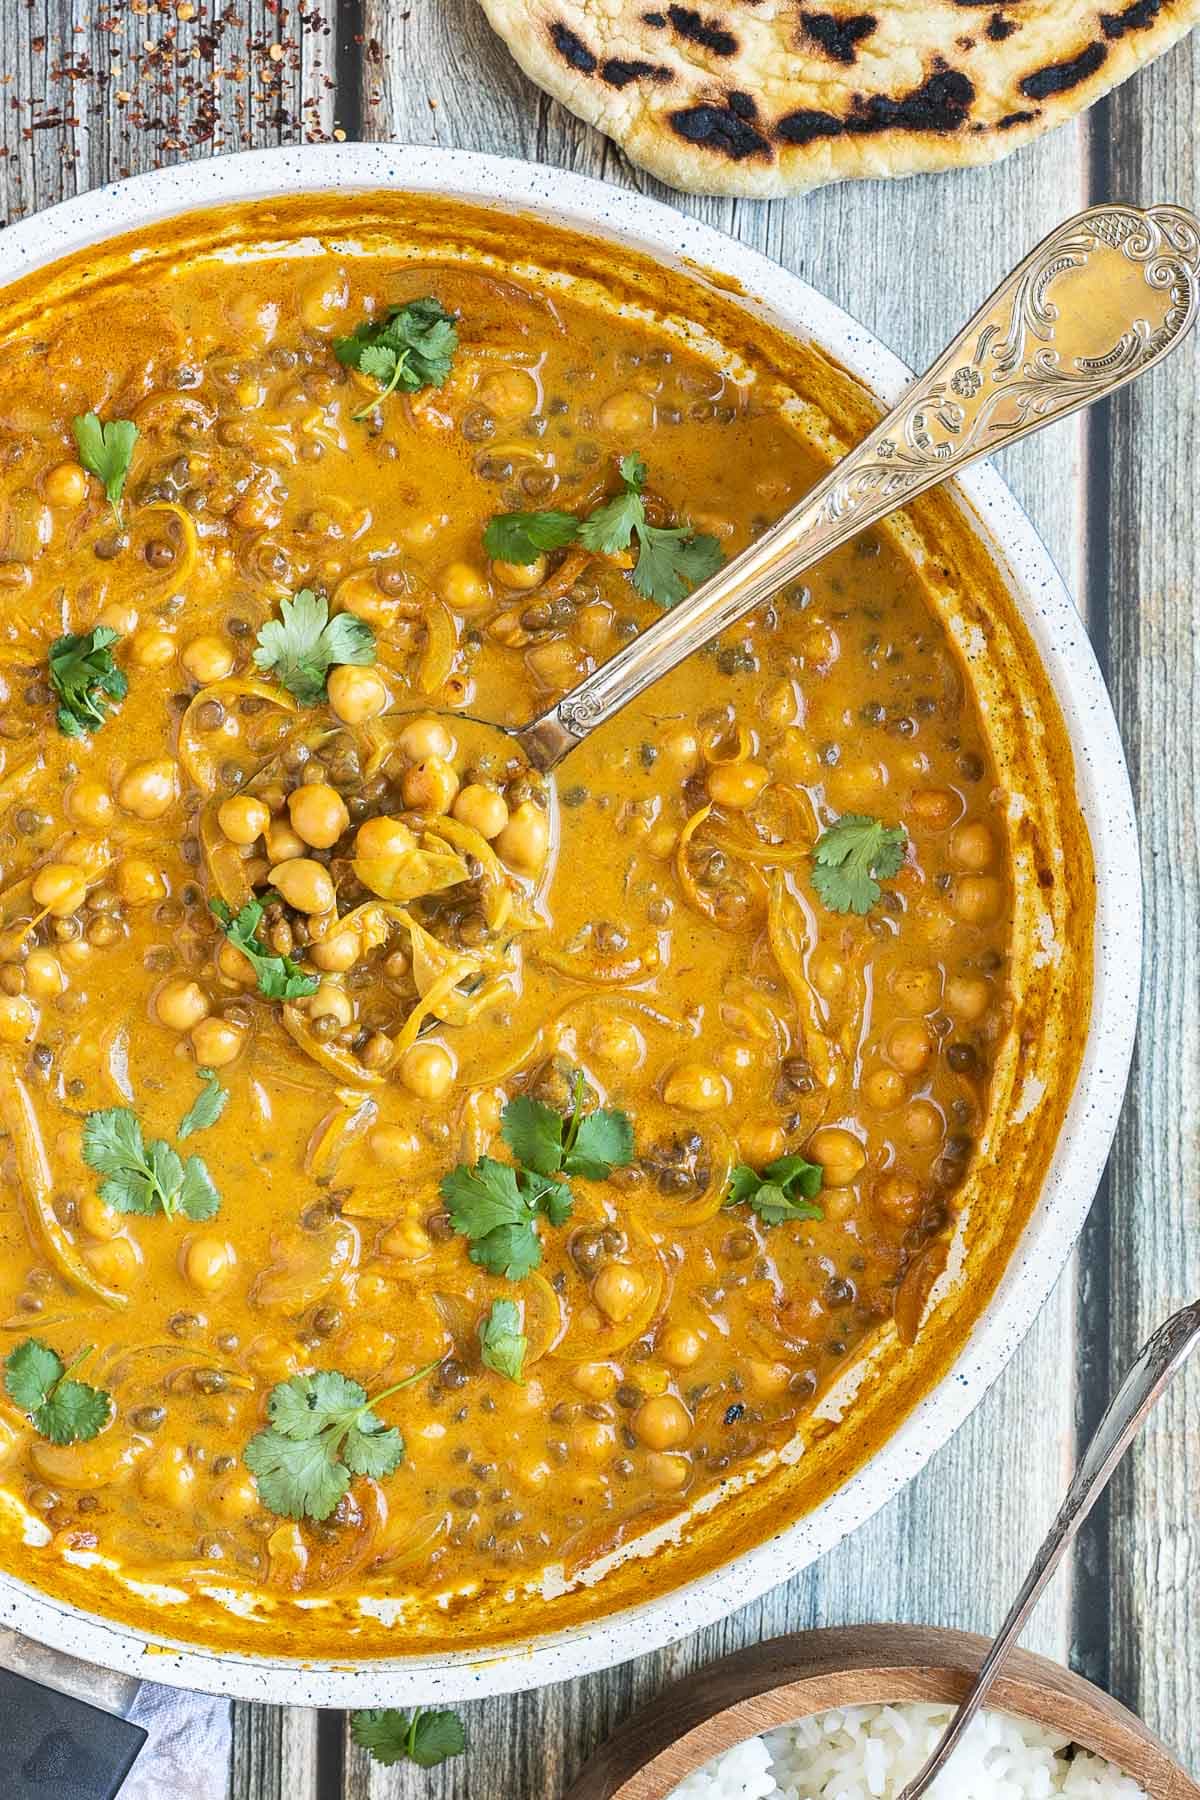 A white frying pan with chickpeas and lentils in a creamy light brown sauce sprinkled freshly chopped cilantro. A spoon is placed inside. Naan bread and a bowl of rice are next to it.